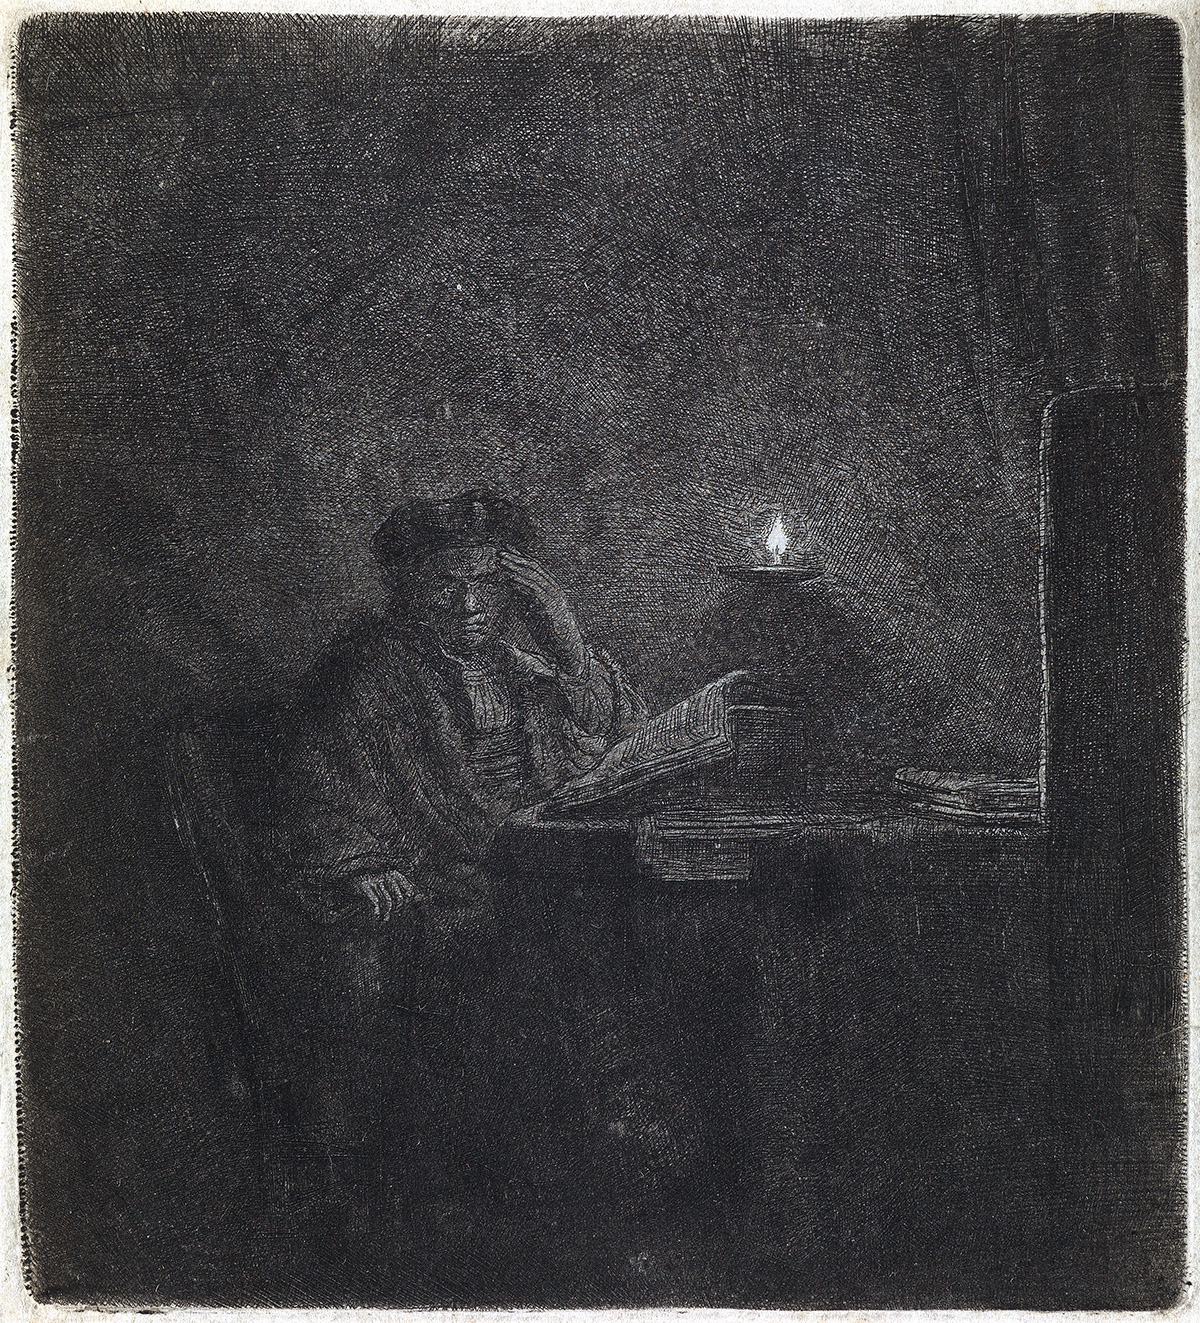 REMBRANDT VAN RIJN A Student at a Table by Candlelight.